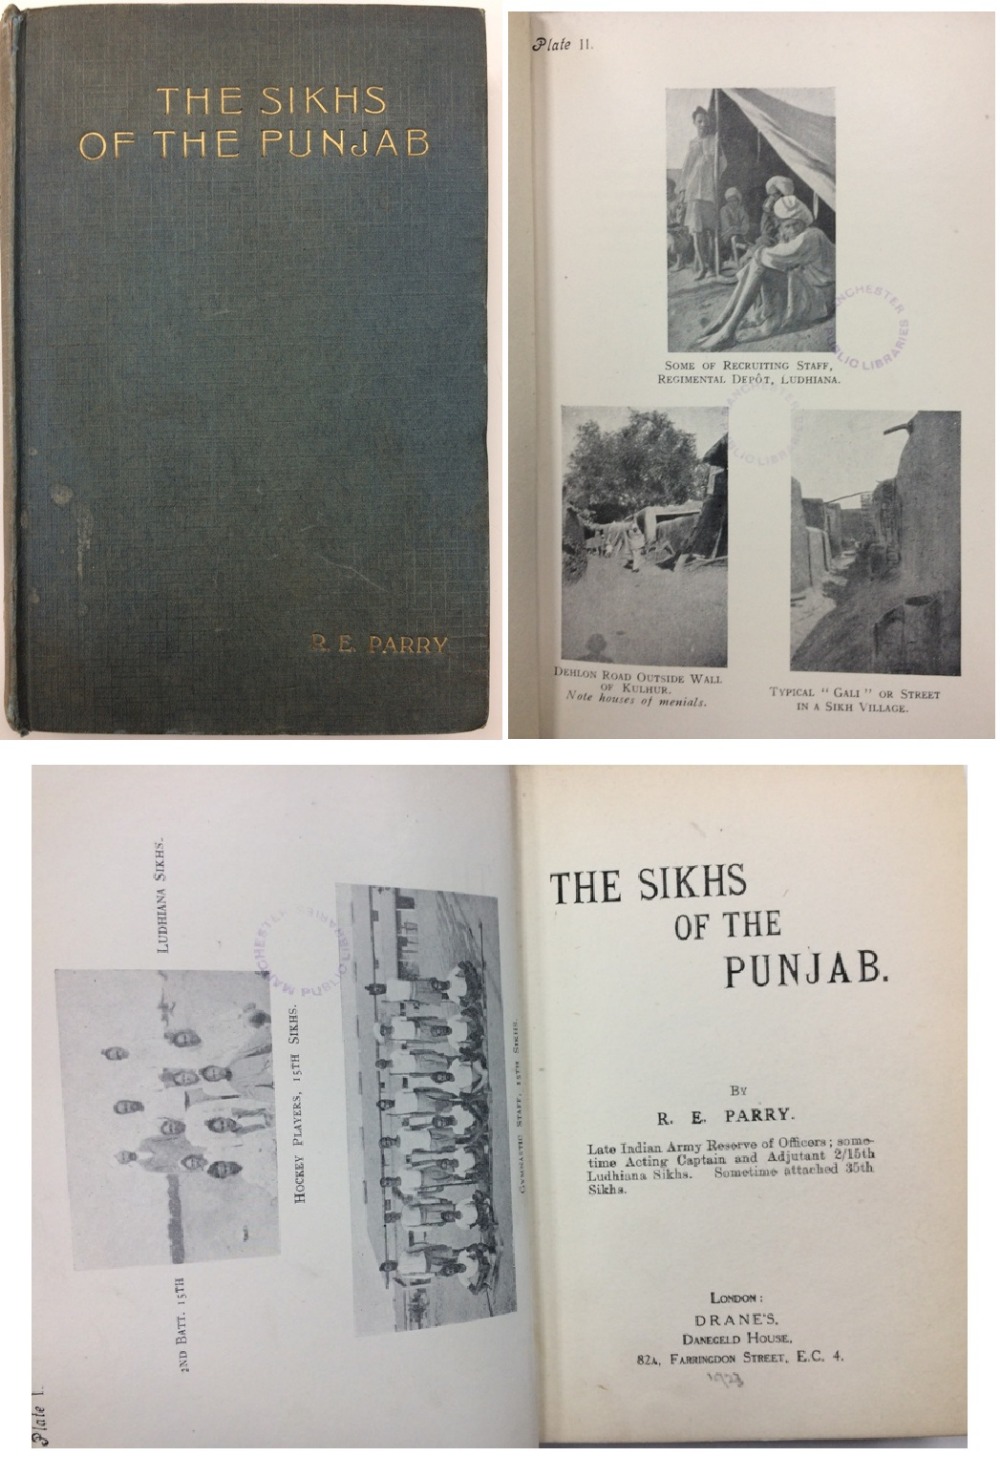 India - The Sikhs of the Punjab - First Edition of The Sikhs of the Punjab. [1923] by R.E. Parry.